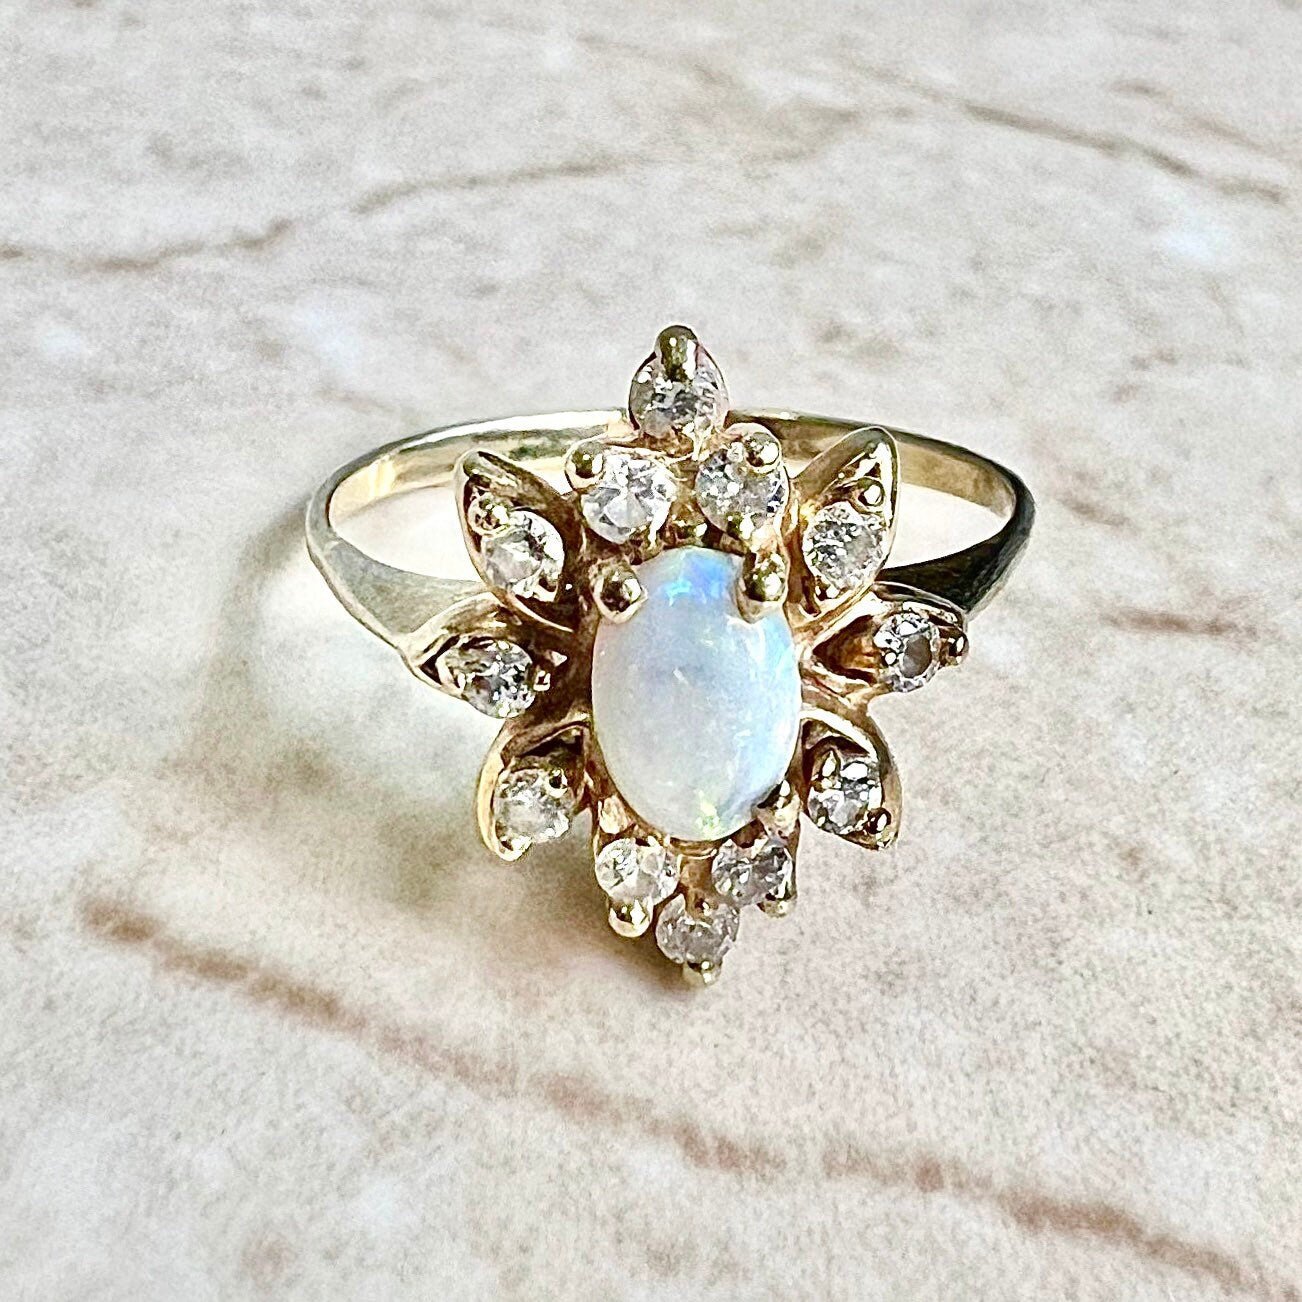 Fine Vintage Diamond & Natural Opal Halo Ring - 14 Karat Yellow Gold Flower Ring - October Birthstone - Birthday Gift - Best Gifts For Her